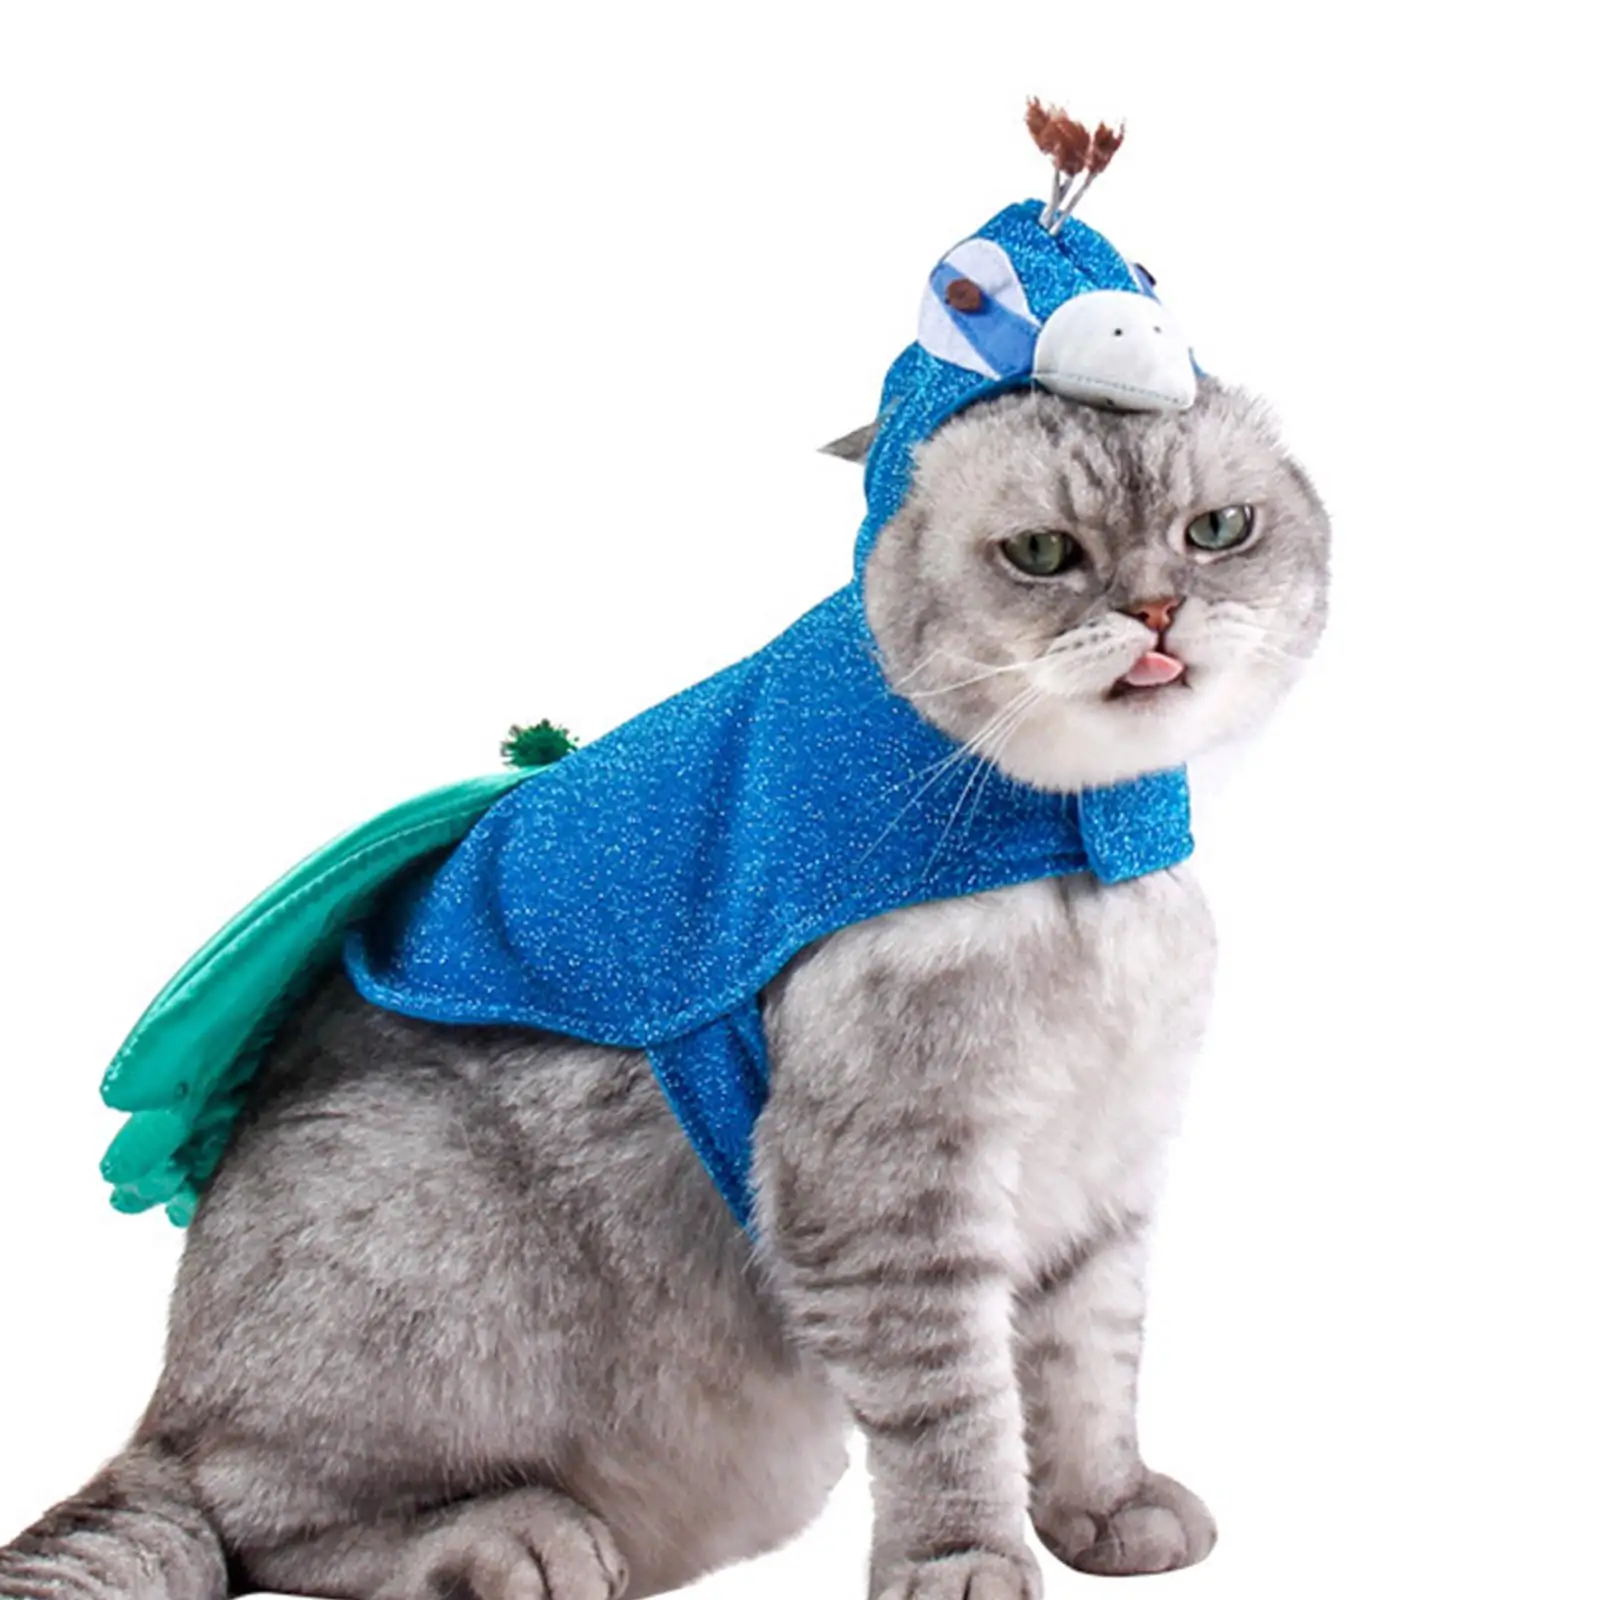 Adjustable Cat Peacock Costume Hat Coat Outfit Pet Clothes for Rabbit Party